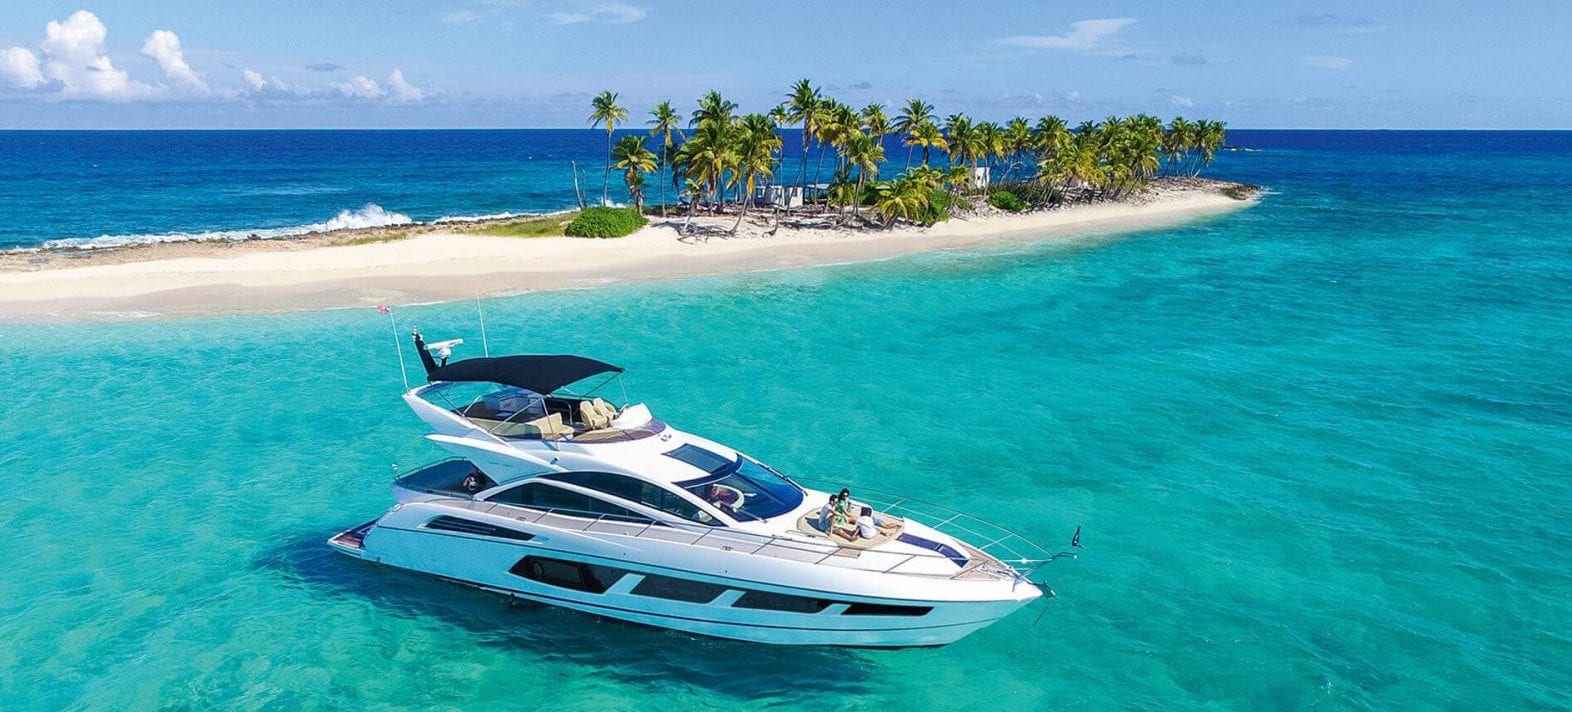 Vacation on a yacht - a new way to go on vacation - Stream Yachts